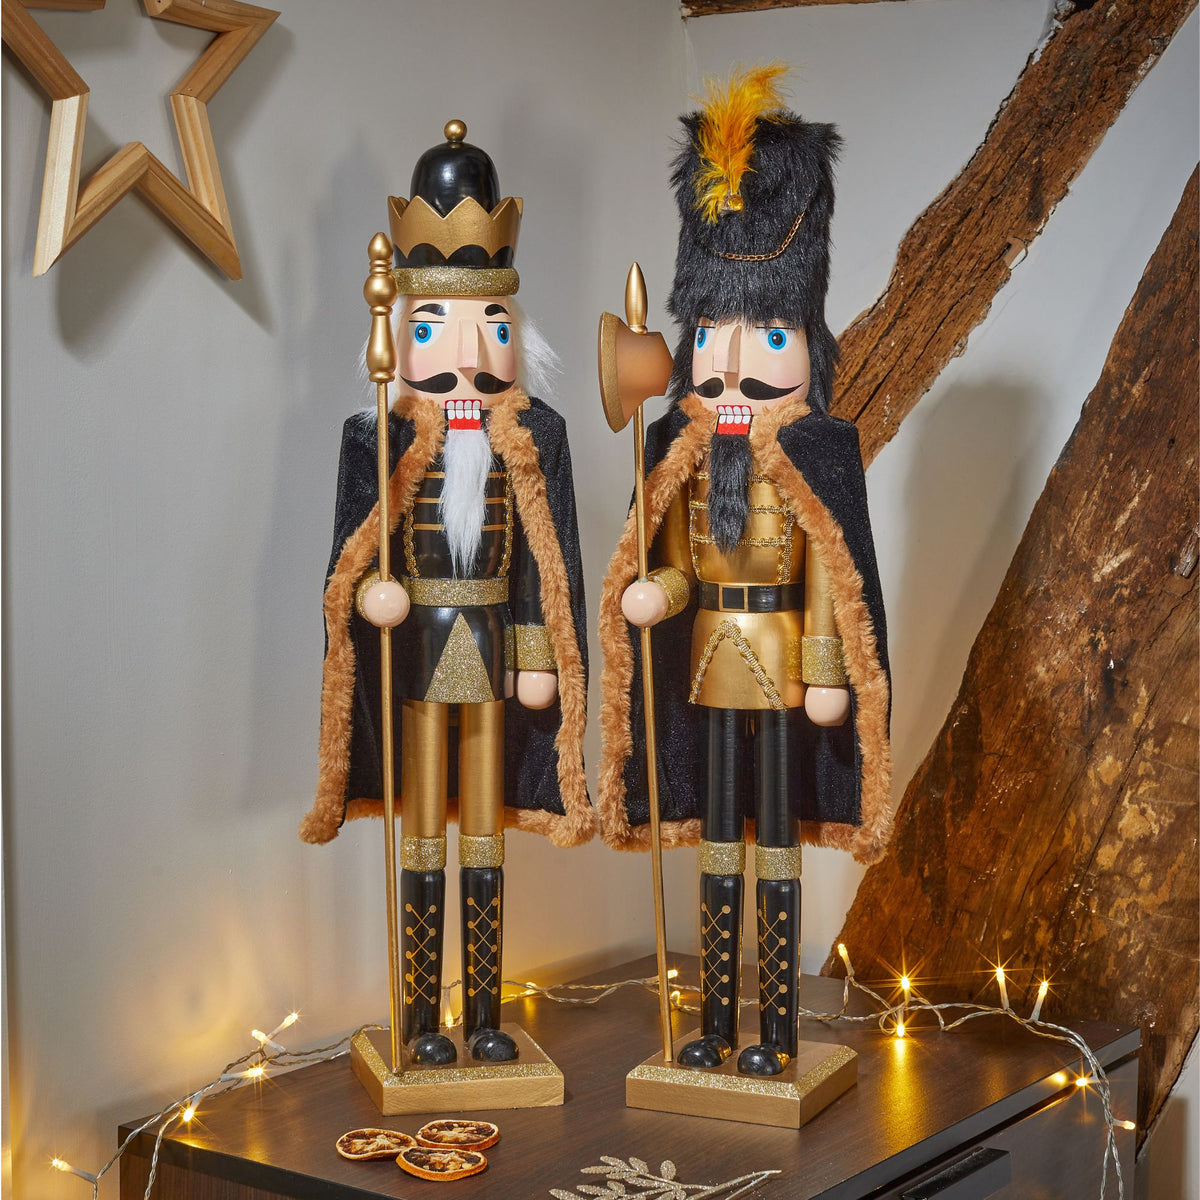 Large Luxury Black and Gold Nutcracker Decoration with Cape and Staff